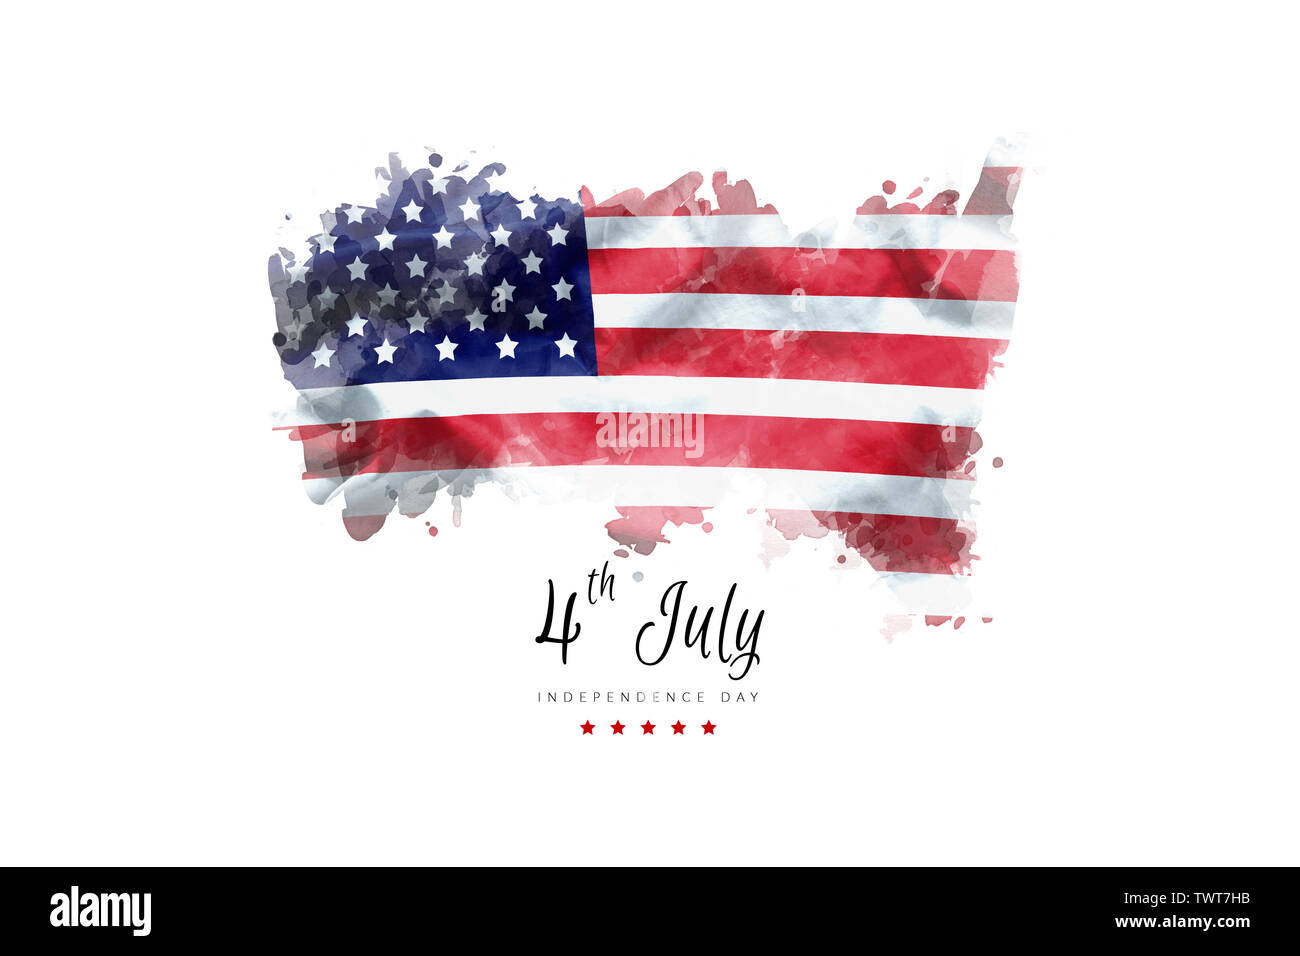 Independence Day greeting card american flag grunge background Stock Photo